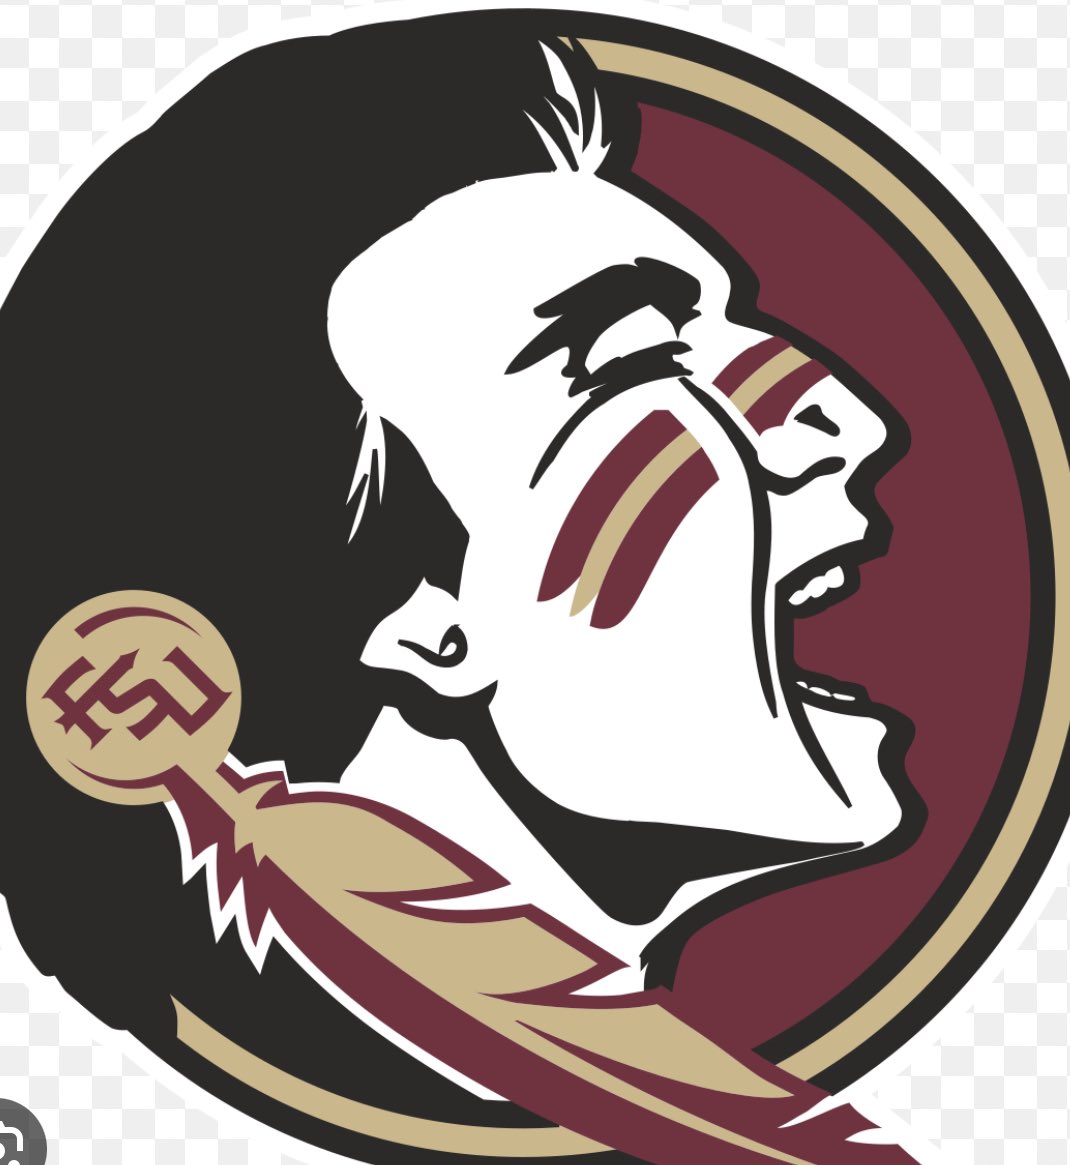 Blessed to receive an offer from Florida state University @WF_Football @KRWallaceFB @FSUFootball @Fertitta_Gabe